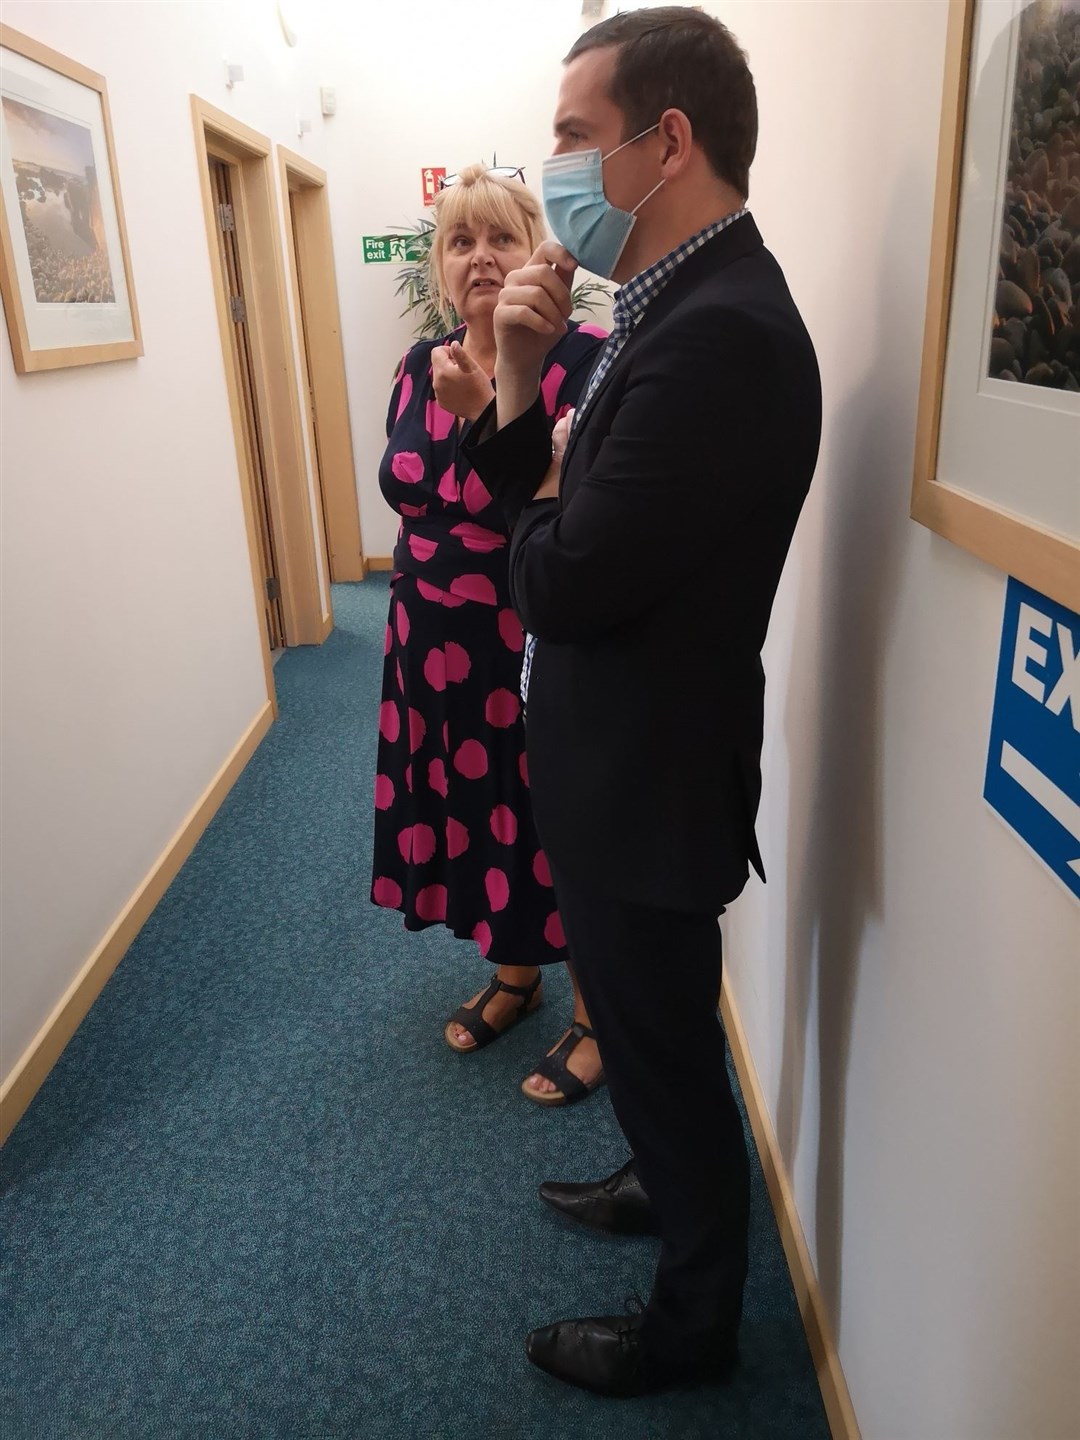 Douglas Ross visited Moray Coast Medical Practice in Lossiemouth, where he met practice manager Alison Frankland.